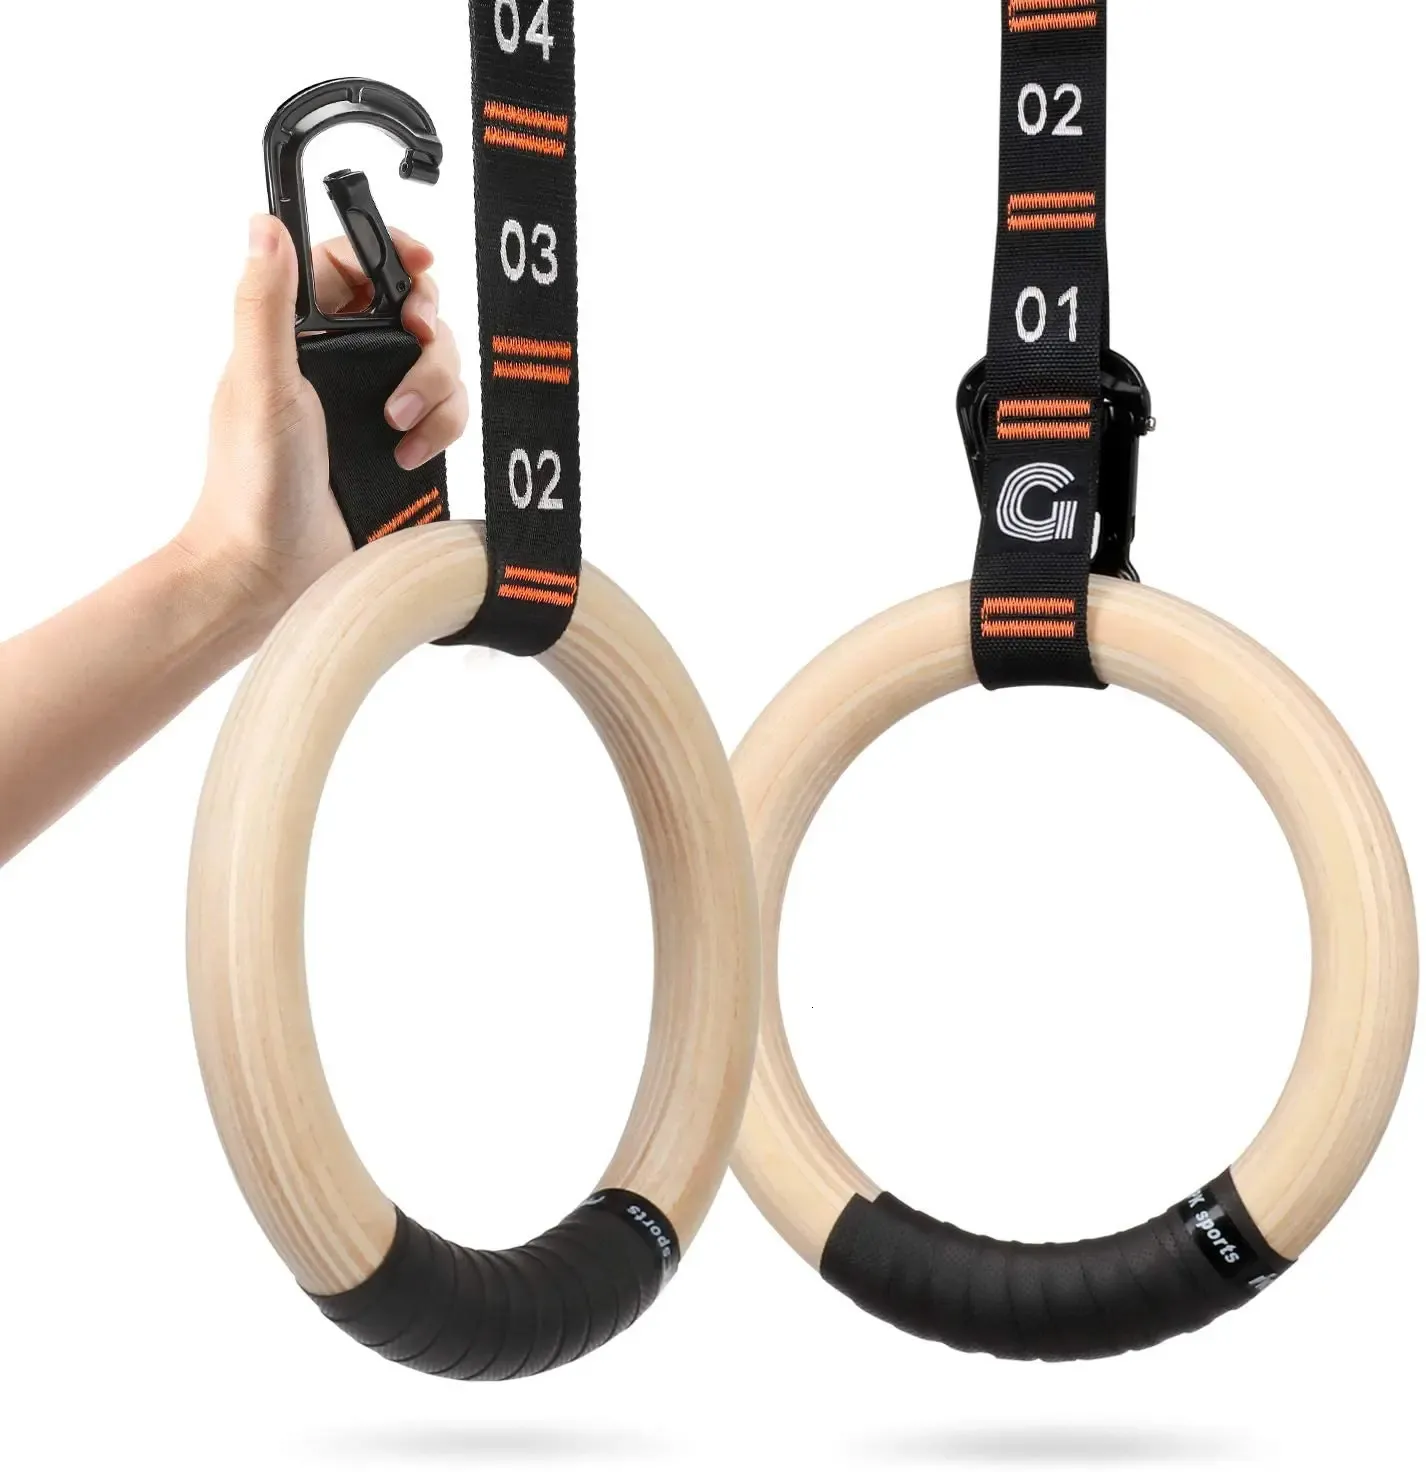 Gymnastic Rings 28mm/32mm Wooden Gymnastic Rings with Adjustable Number Straps Pull Up Non-Slip Rings for Crossfit training 231012